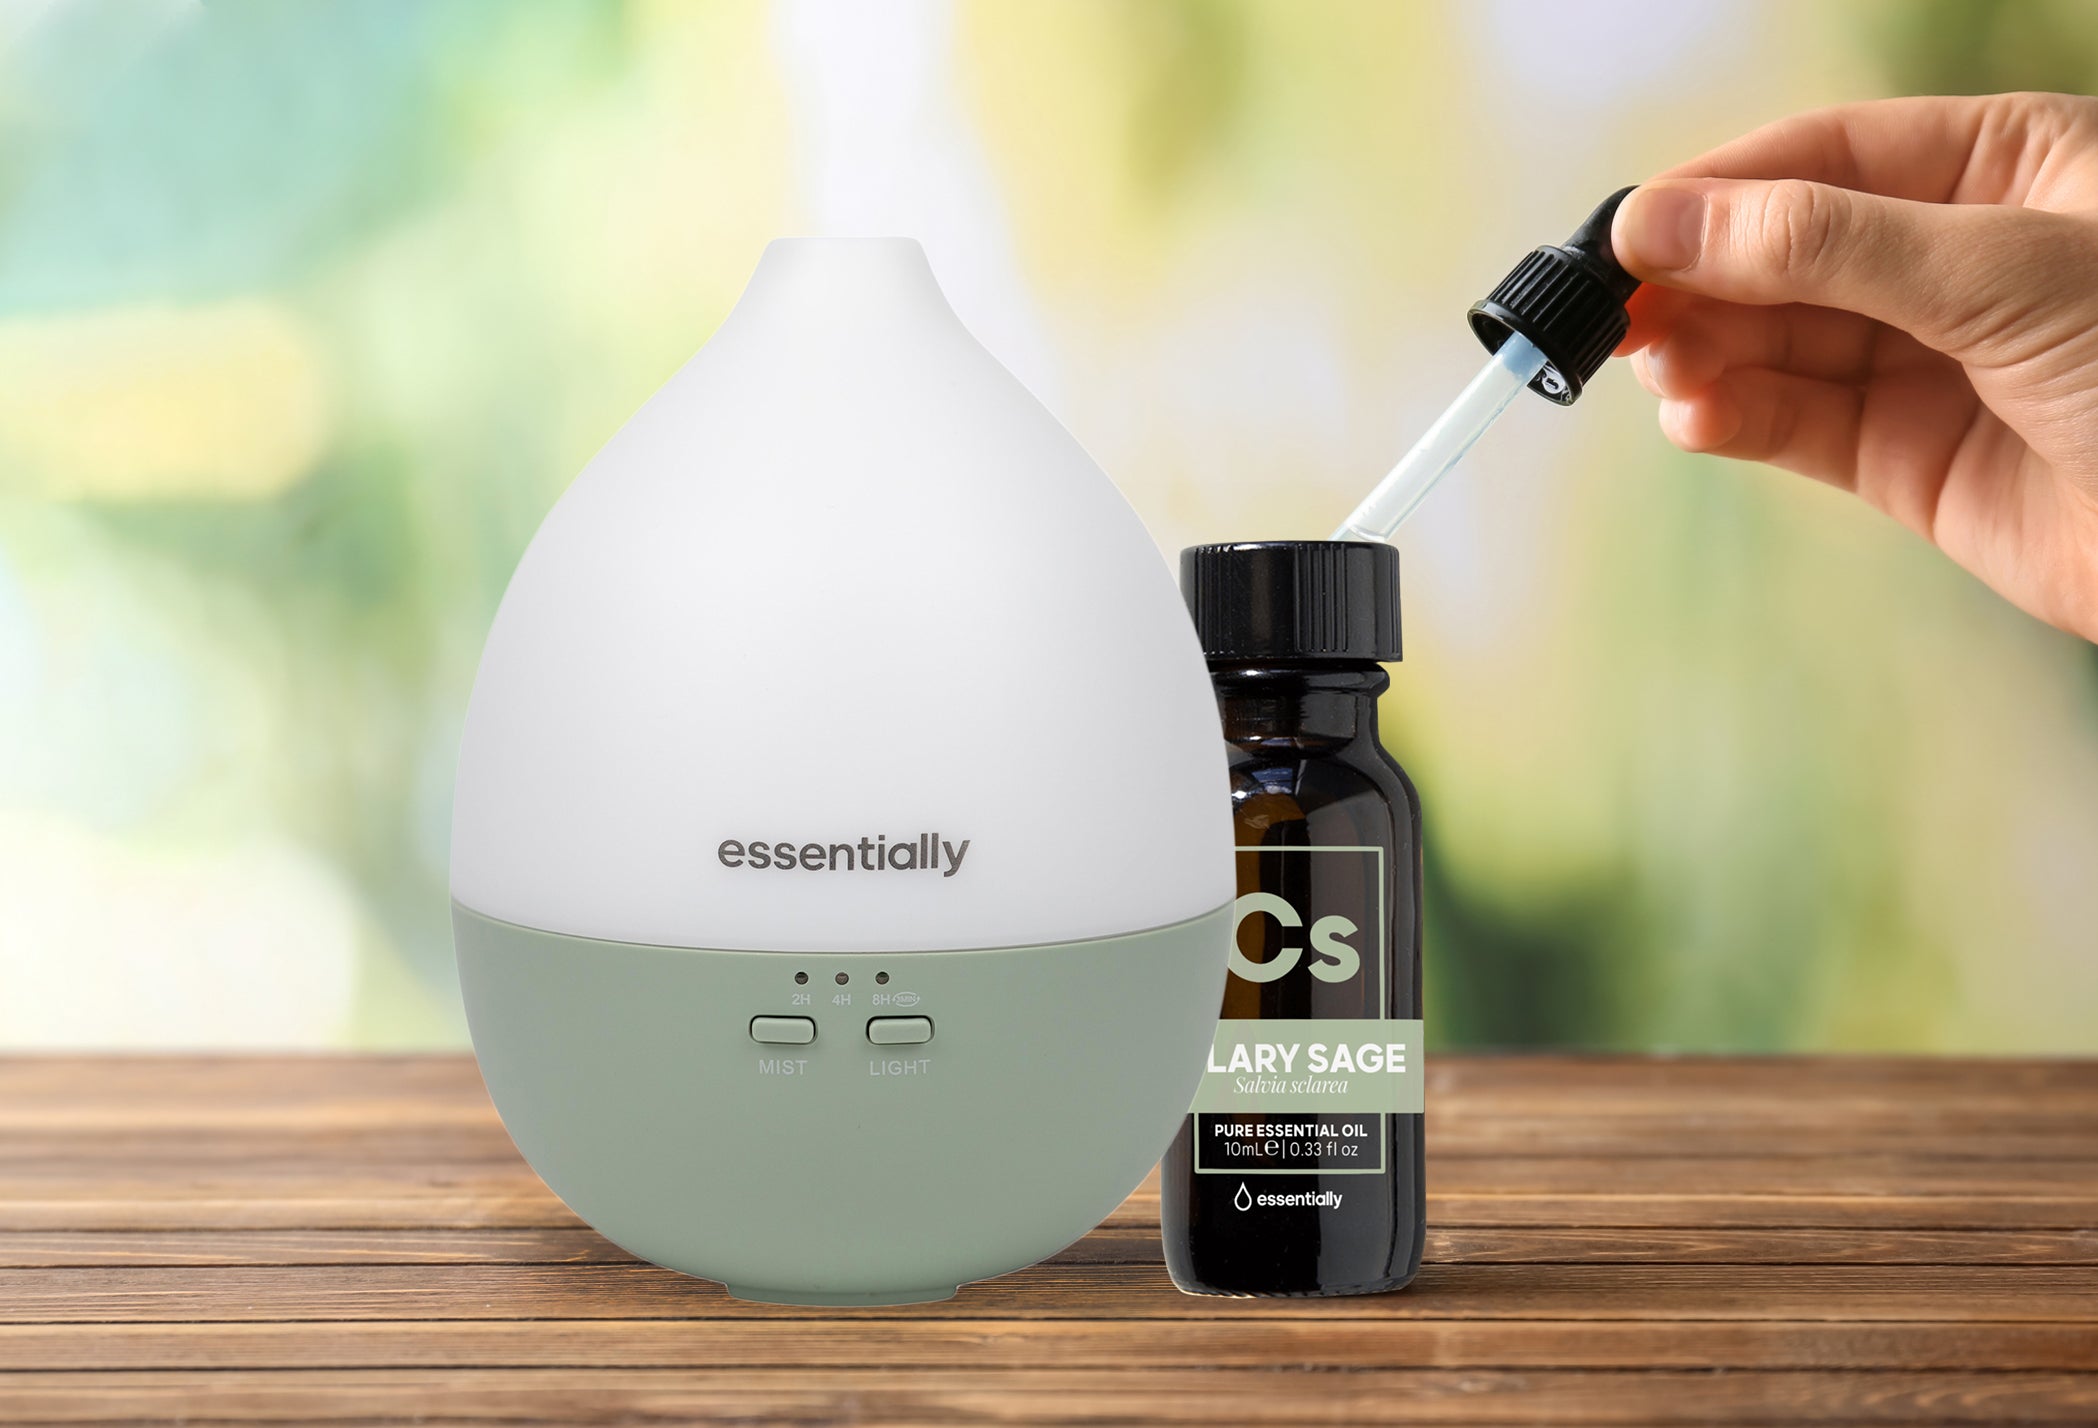 How many drops of essential oil per ml are in a diffuser? - Quora